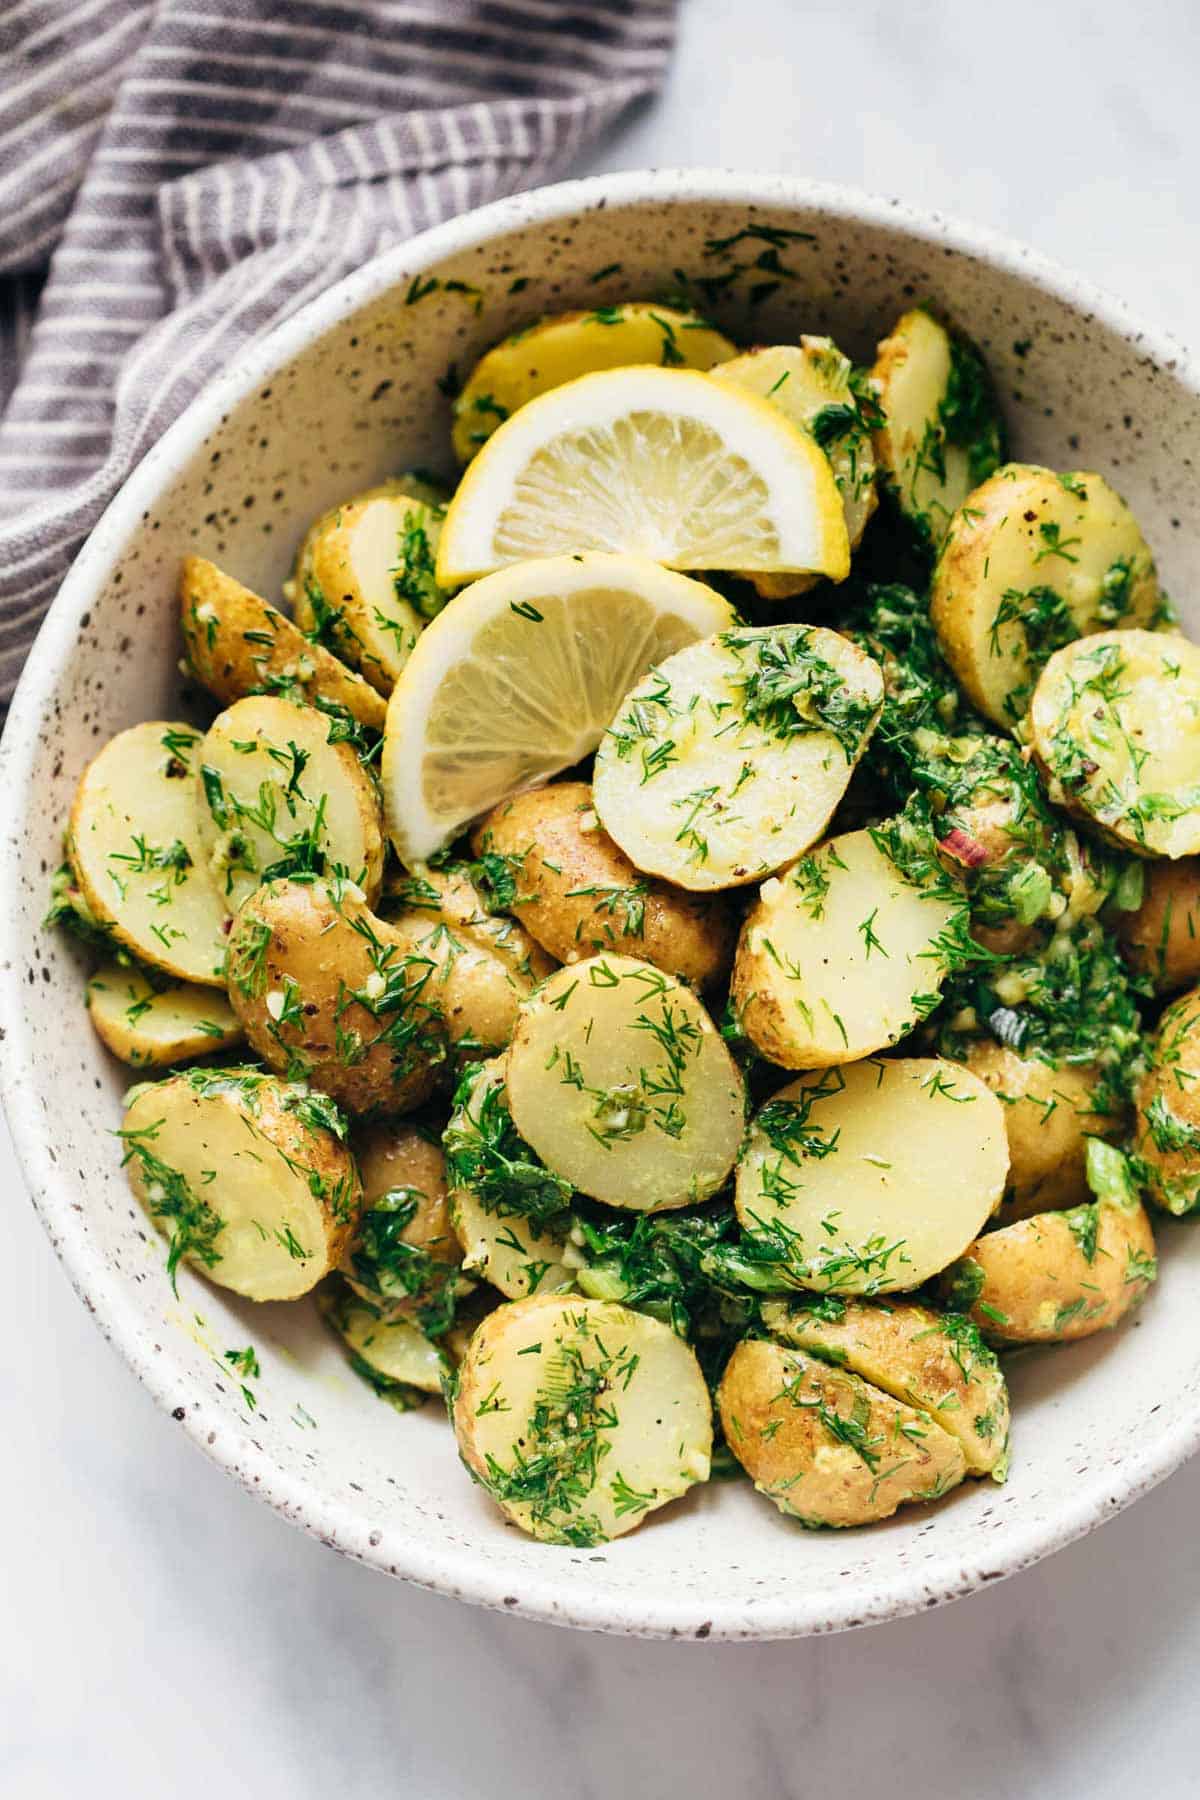 Healthy Lemon Dill Potato Salad (no mayo) served in a white speckled trencher with lemon wedges